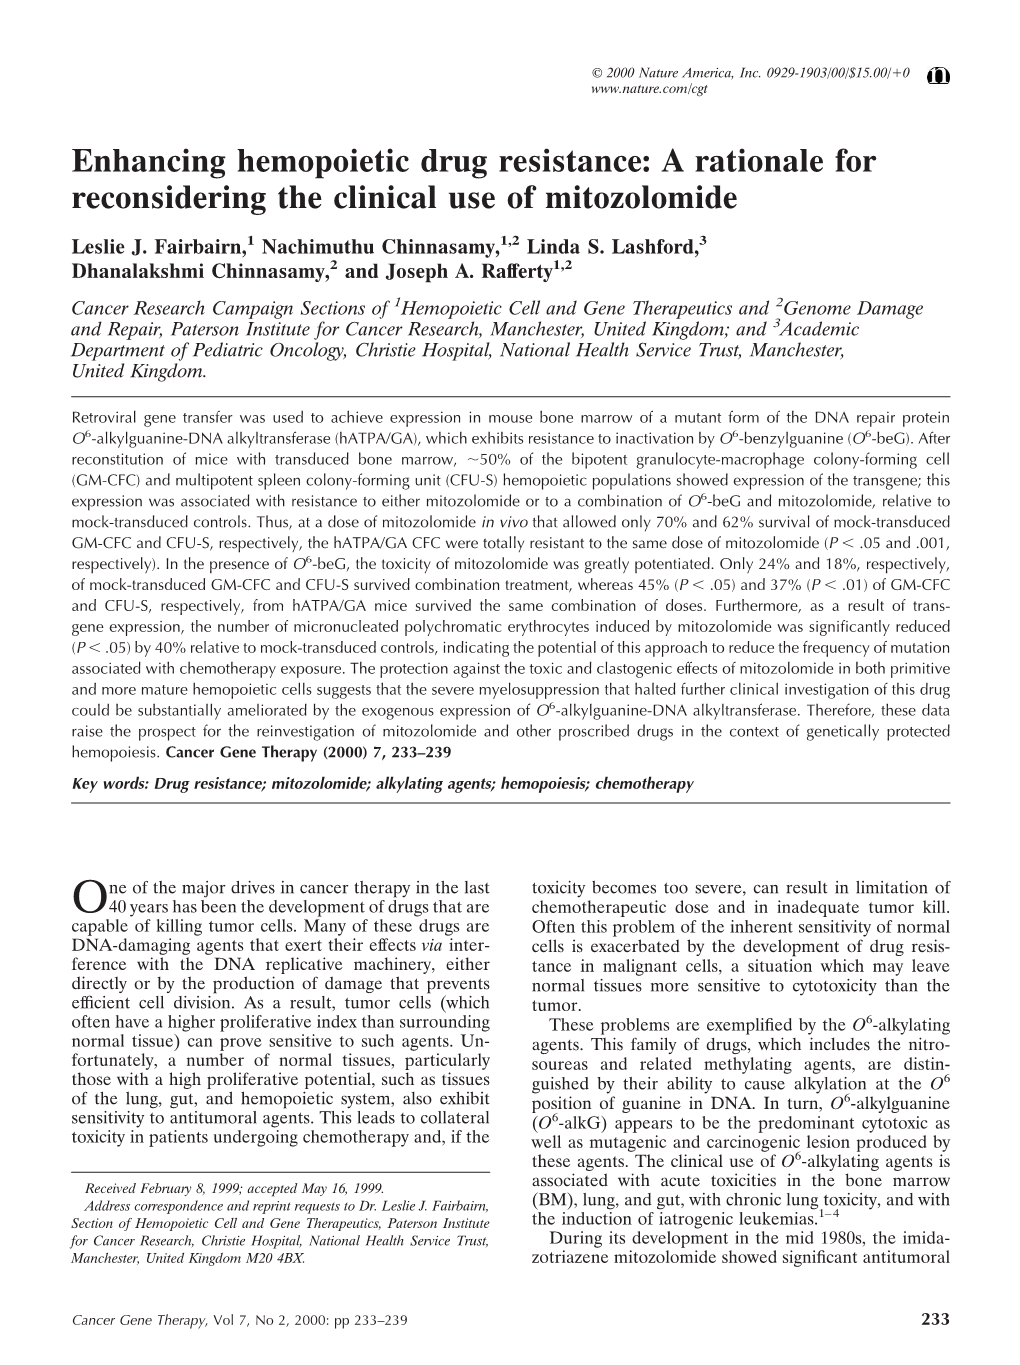 Enhancing Hemopoietic Drug Resistance: a Rationale for Reconsidering the Clinical Use of Mitozolomide